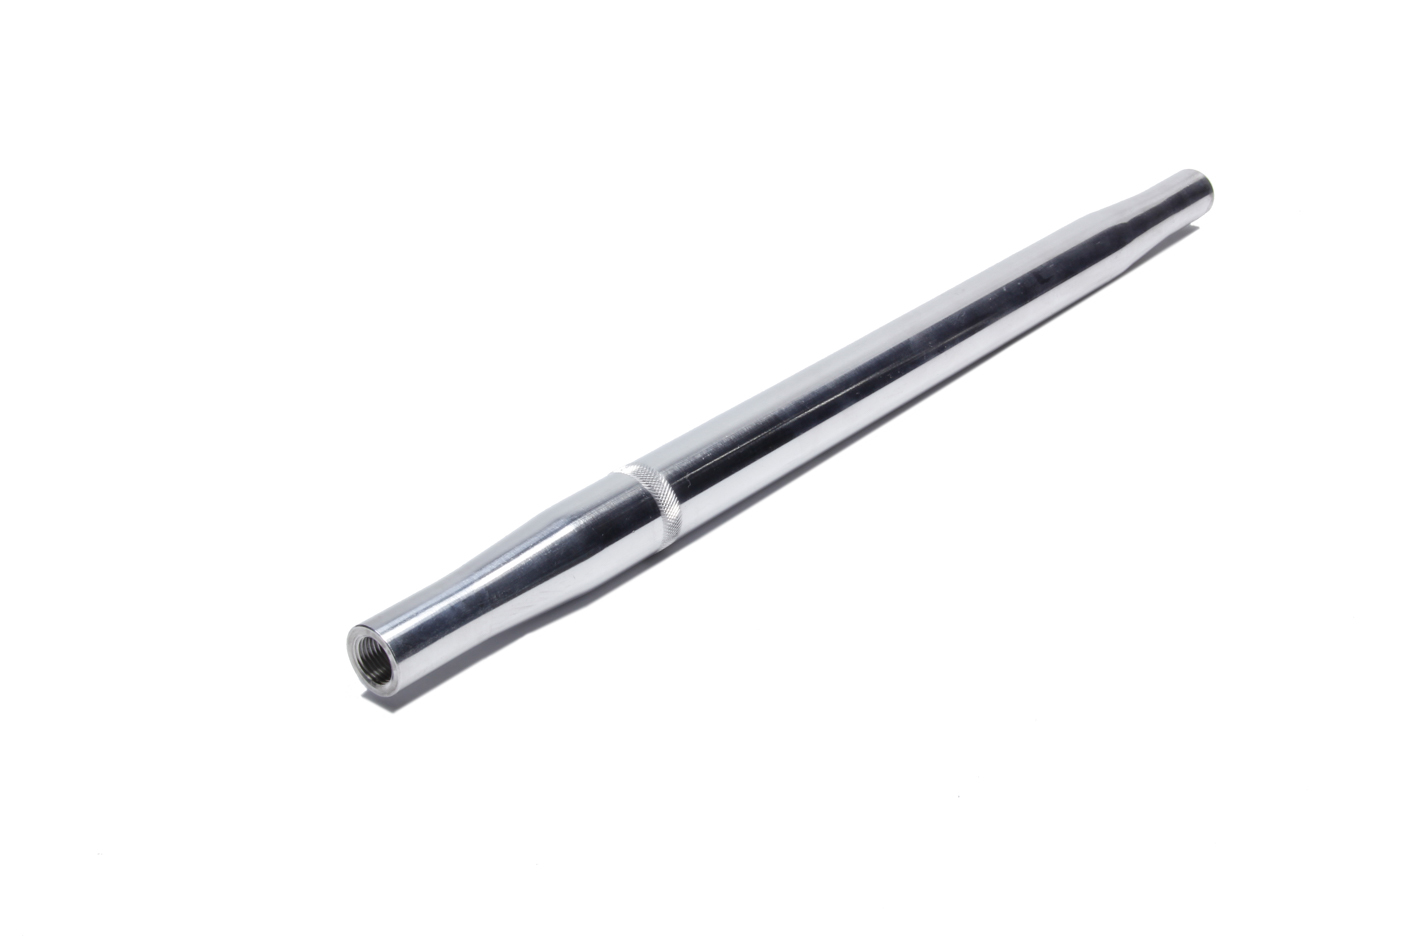 M AND W ALUMINUM PRODUCTS Swaged Rod 1.125in. x 27in. 5/8in. Thread P/N - SR-27L-POL